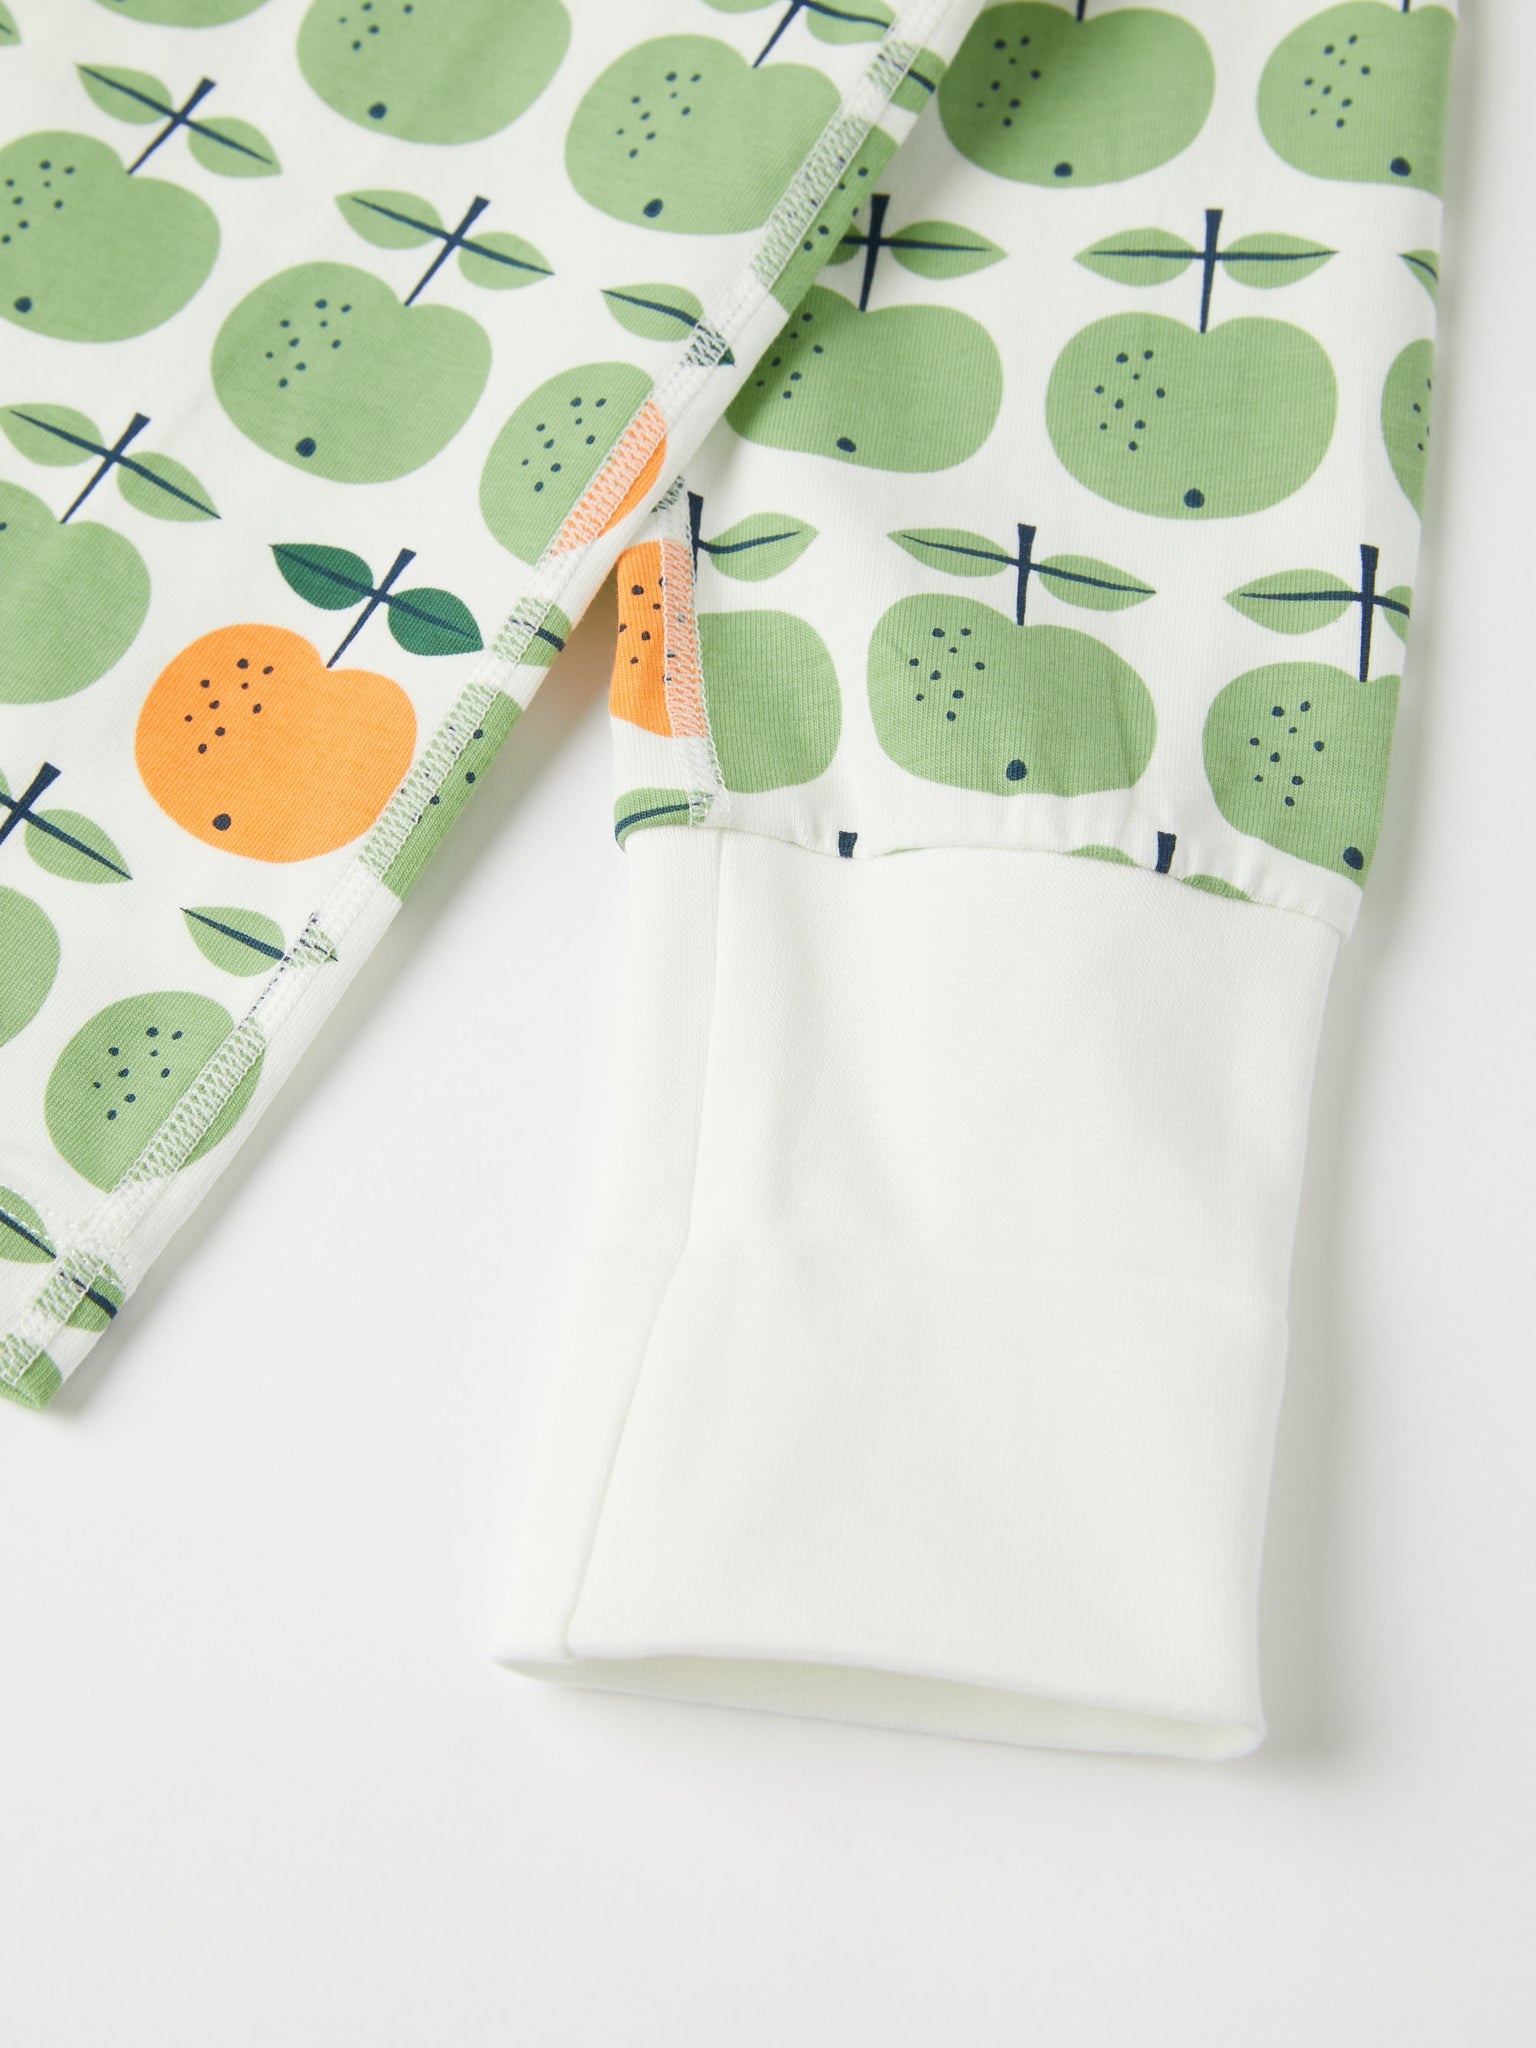 Apple Print Kids Pyjamas from the Polarn O. Pyret kidswear collection. Ethically produced kids clothing.